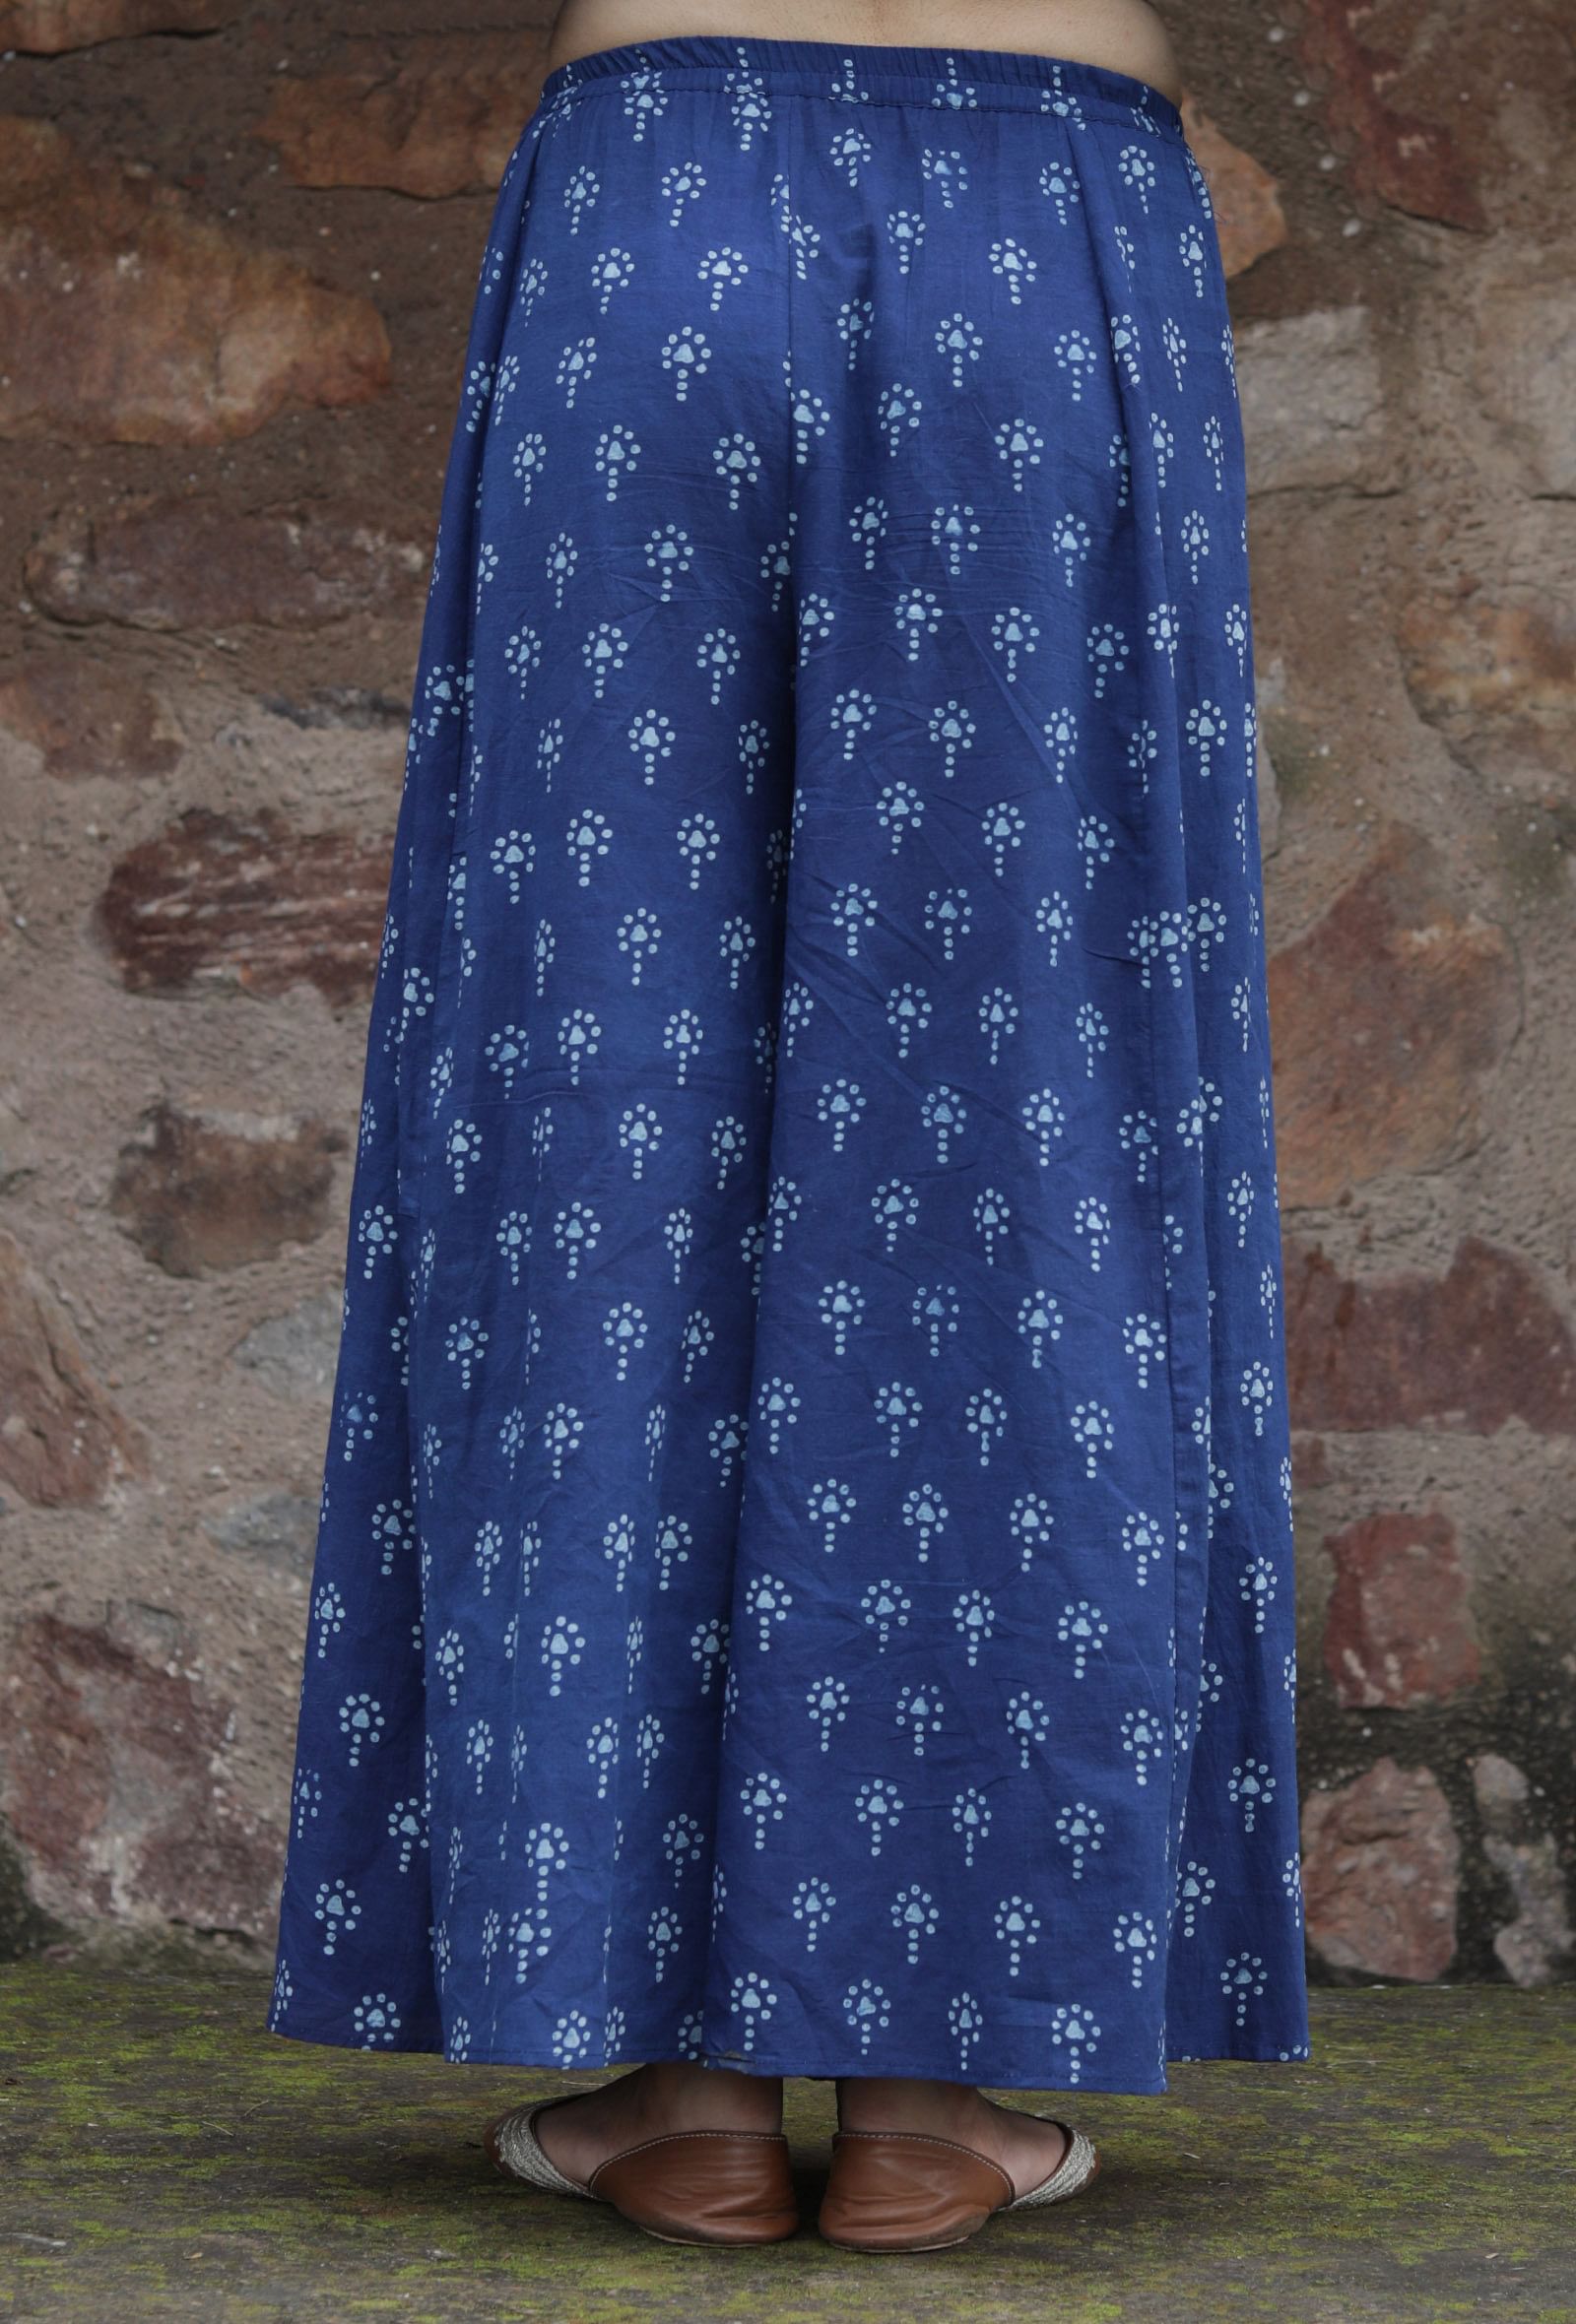 Printed Cotton Rayon Palazzo Pants for Women and Girls in Black and White  Combo Pack.